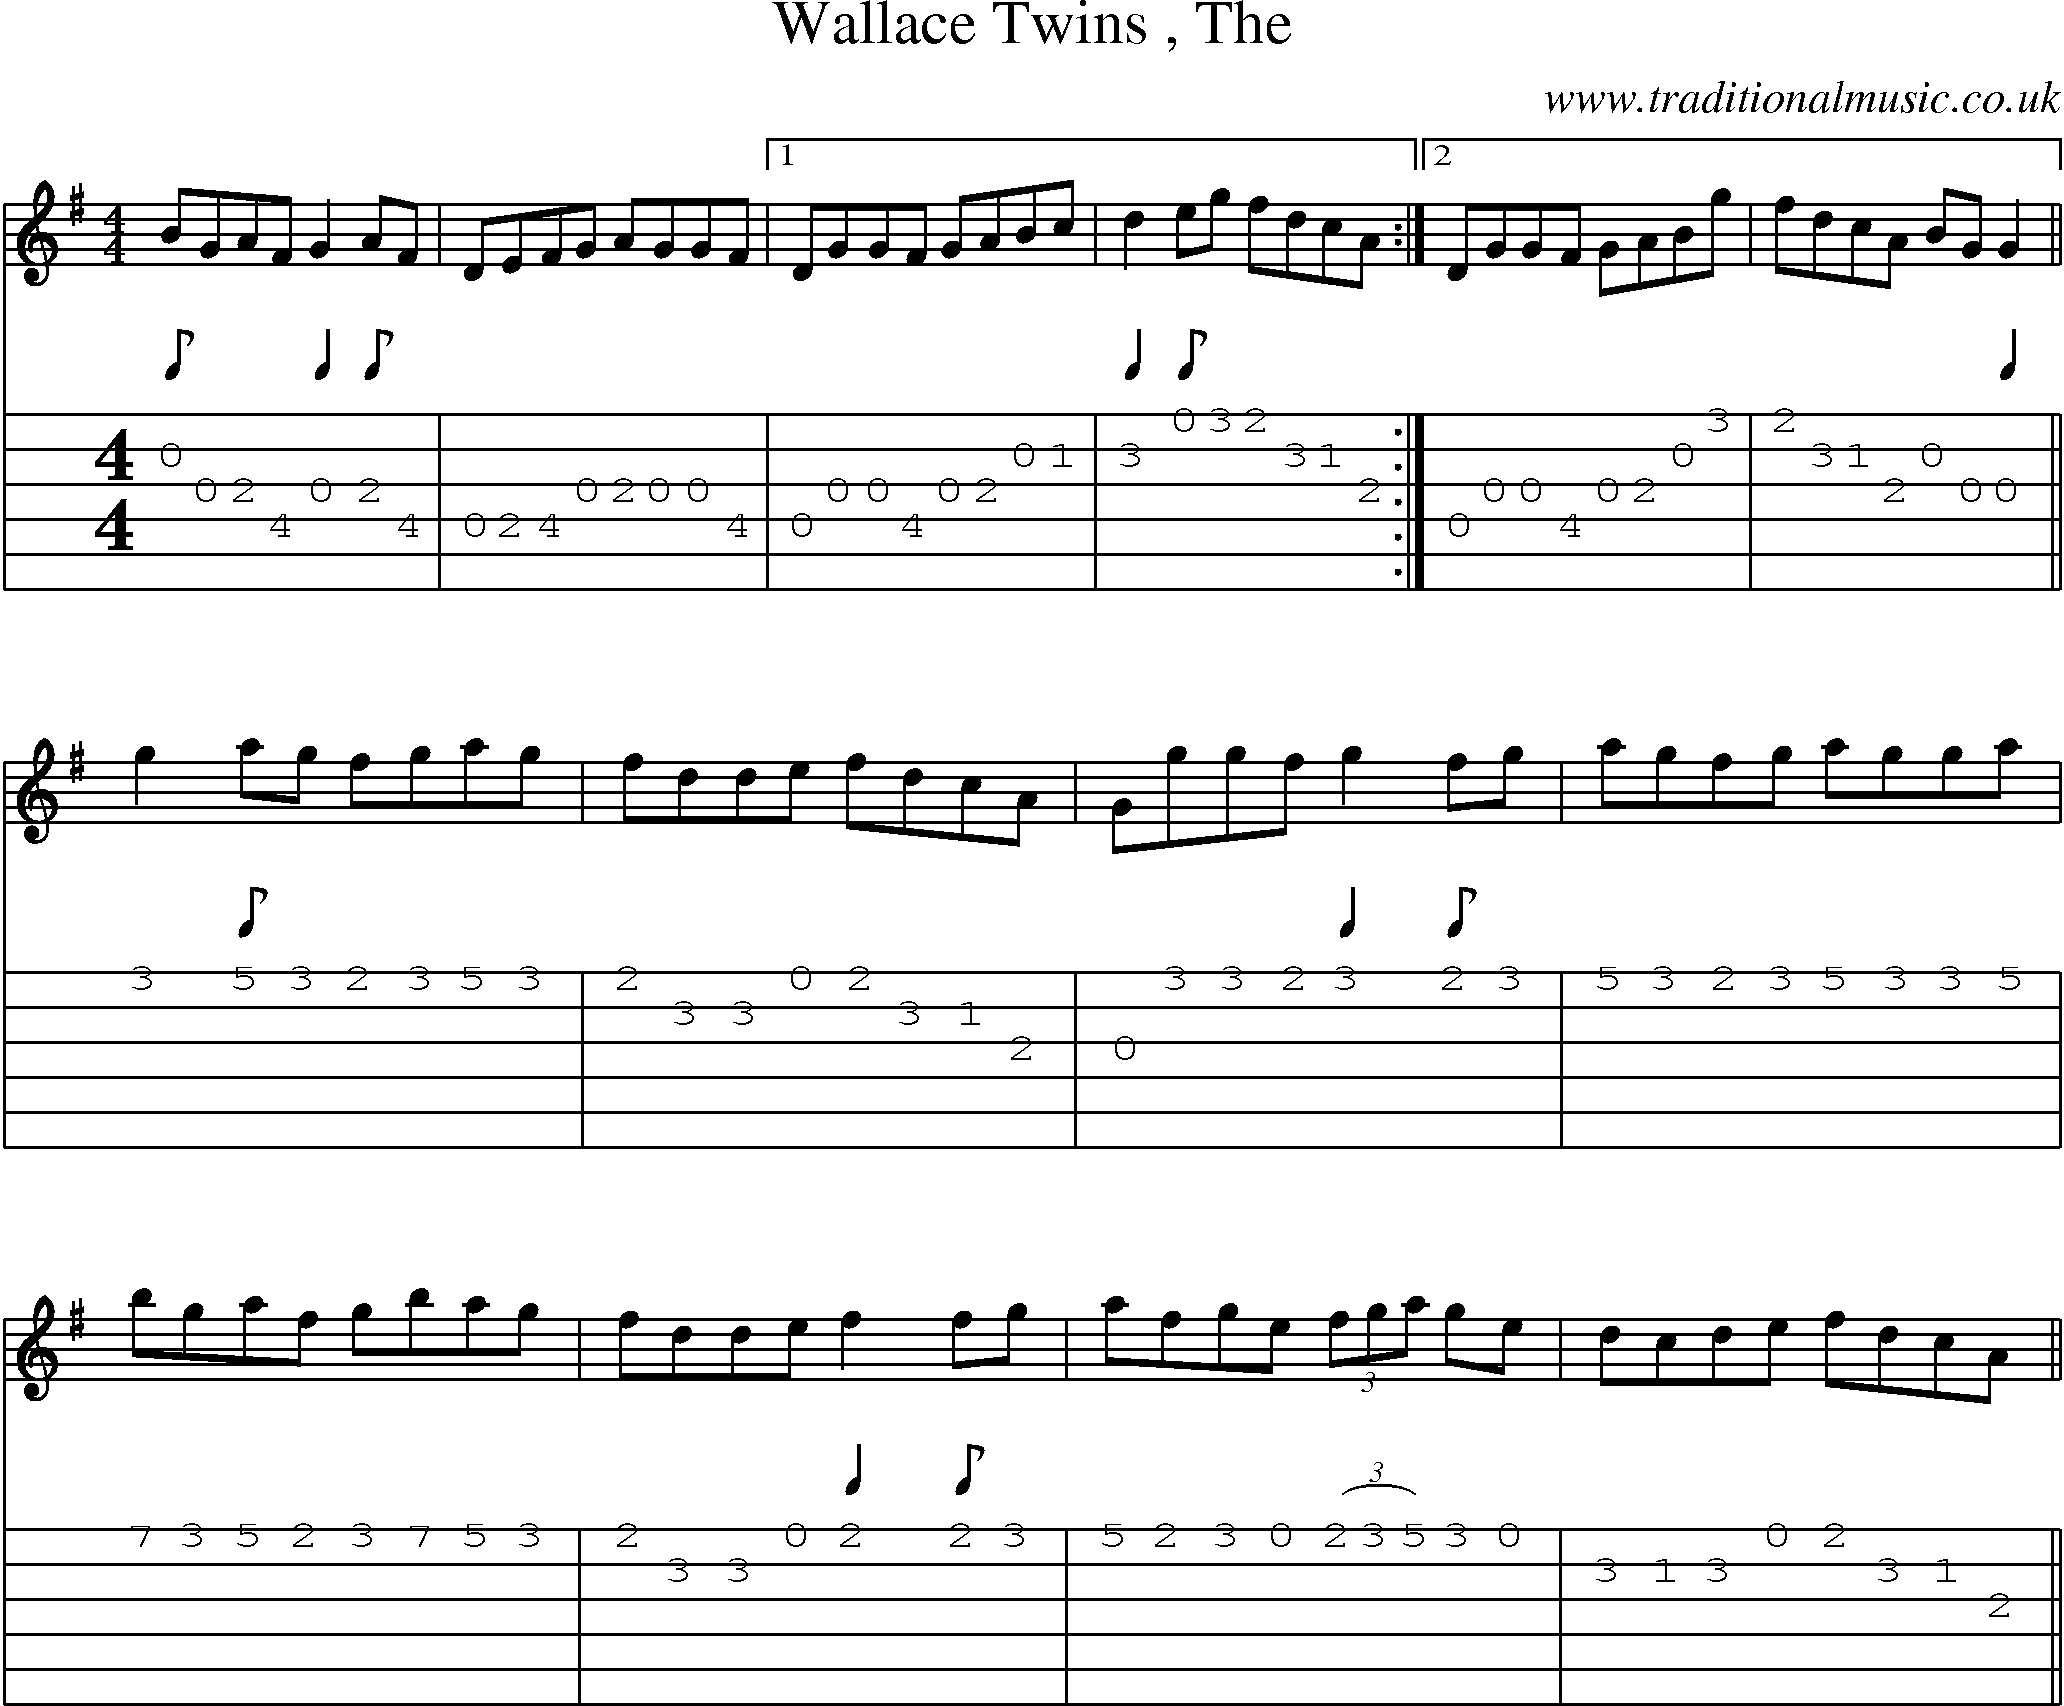 Music Score and Guitar Tabs for Wallace Twins